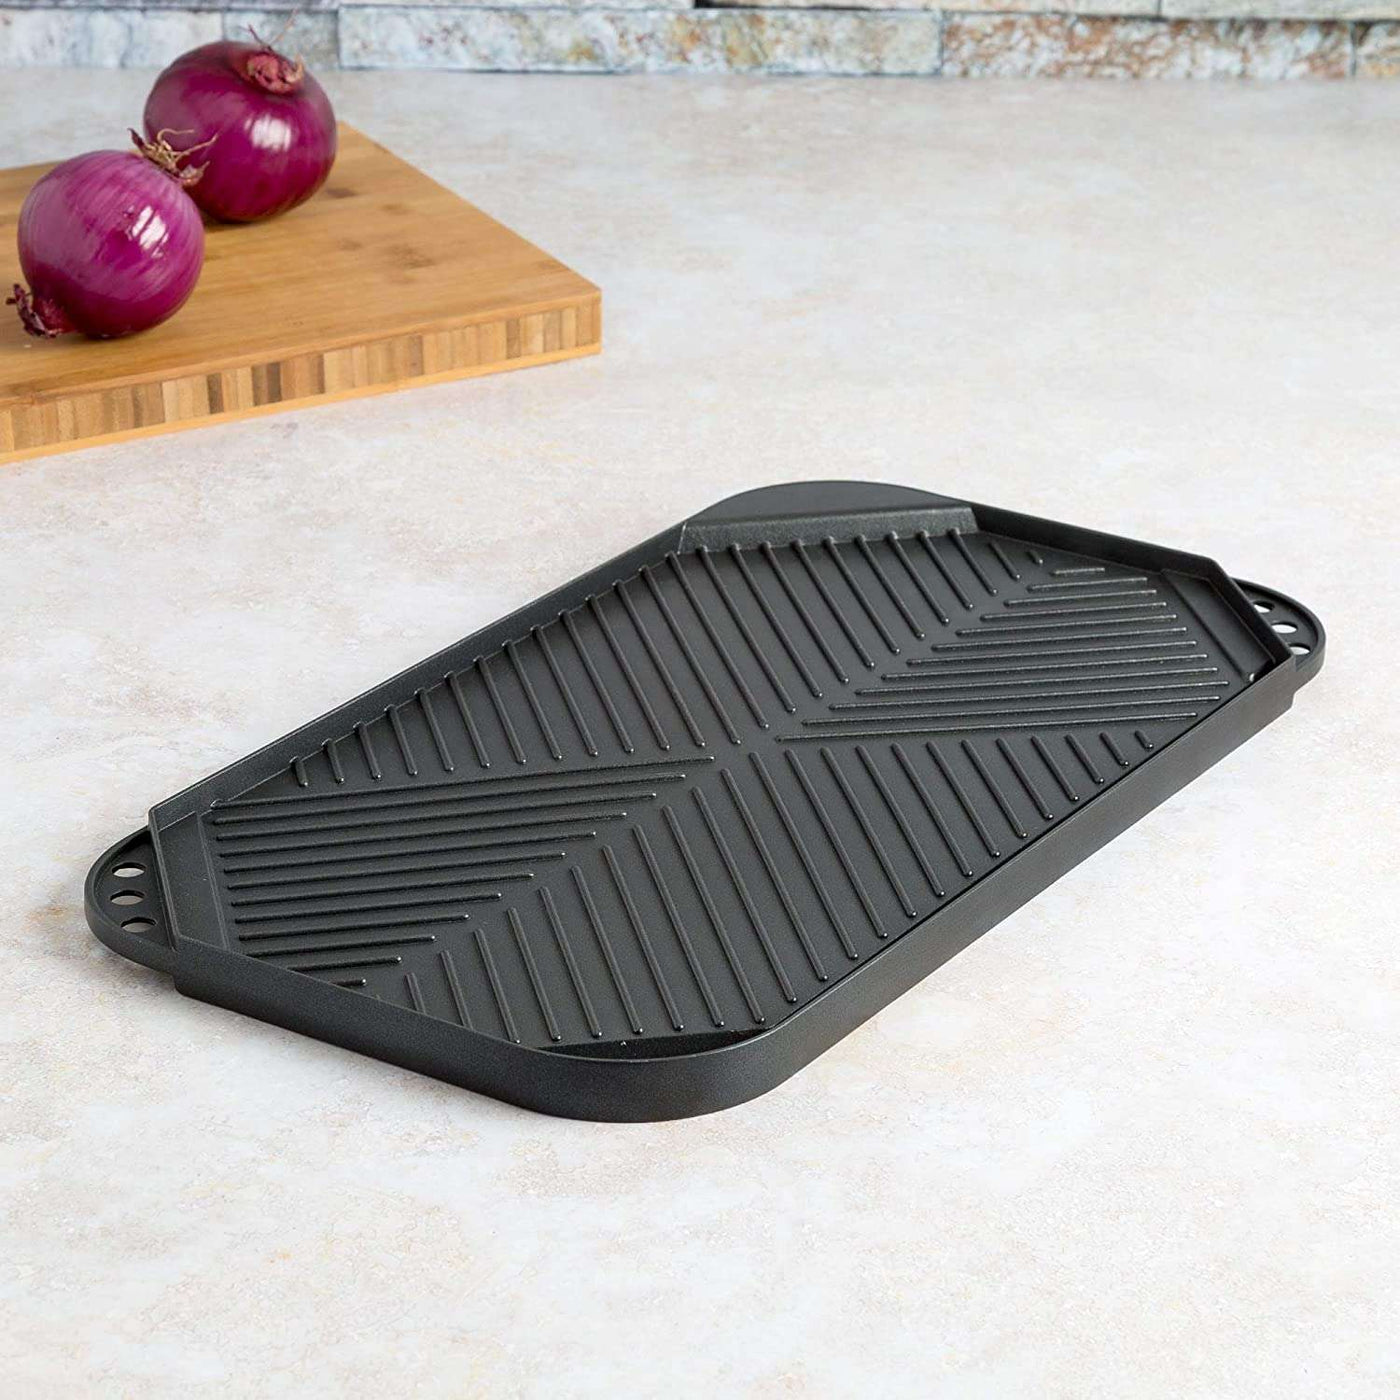 Reversible 19.5” x 11” Grill/Griddle Pan, Non-Stick, Dishwasher